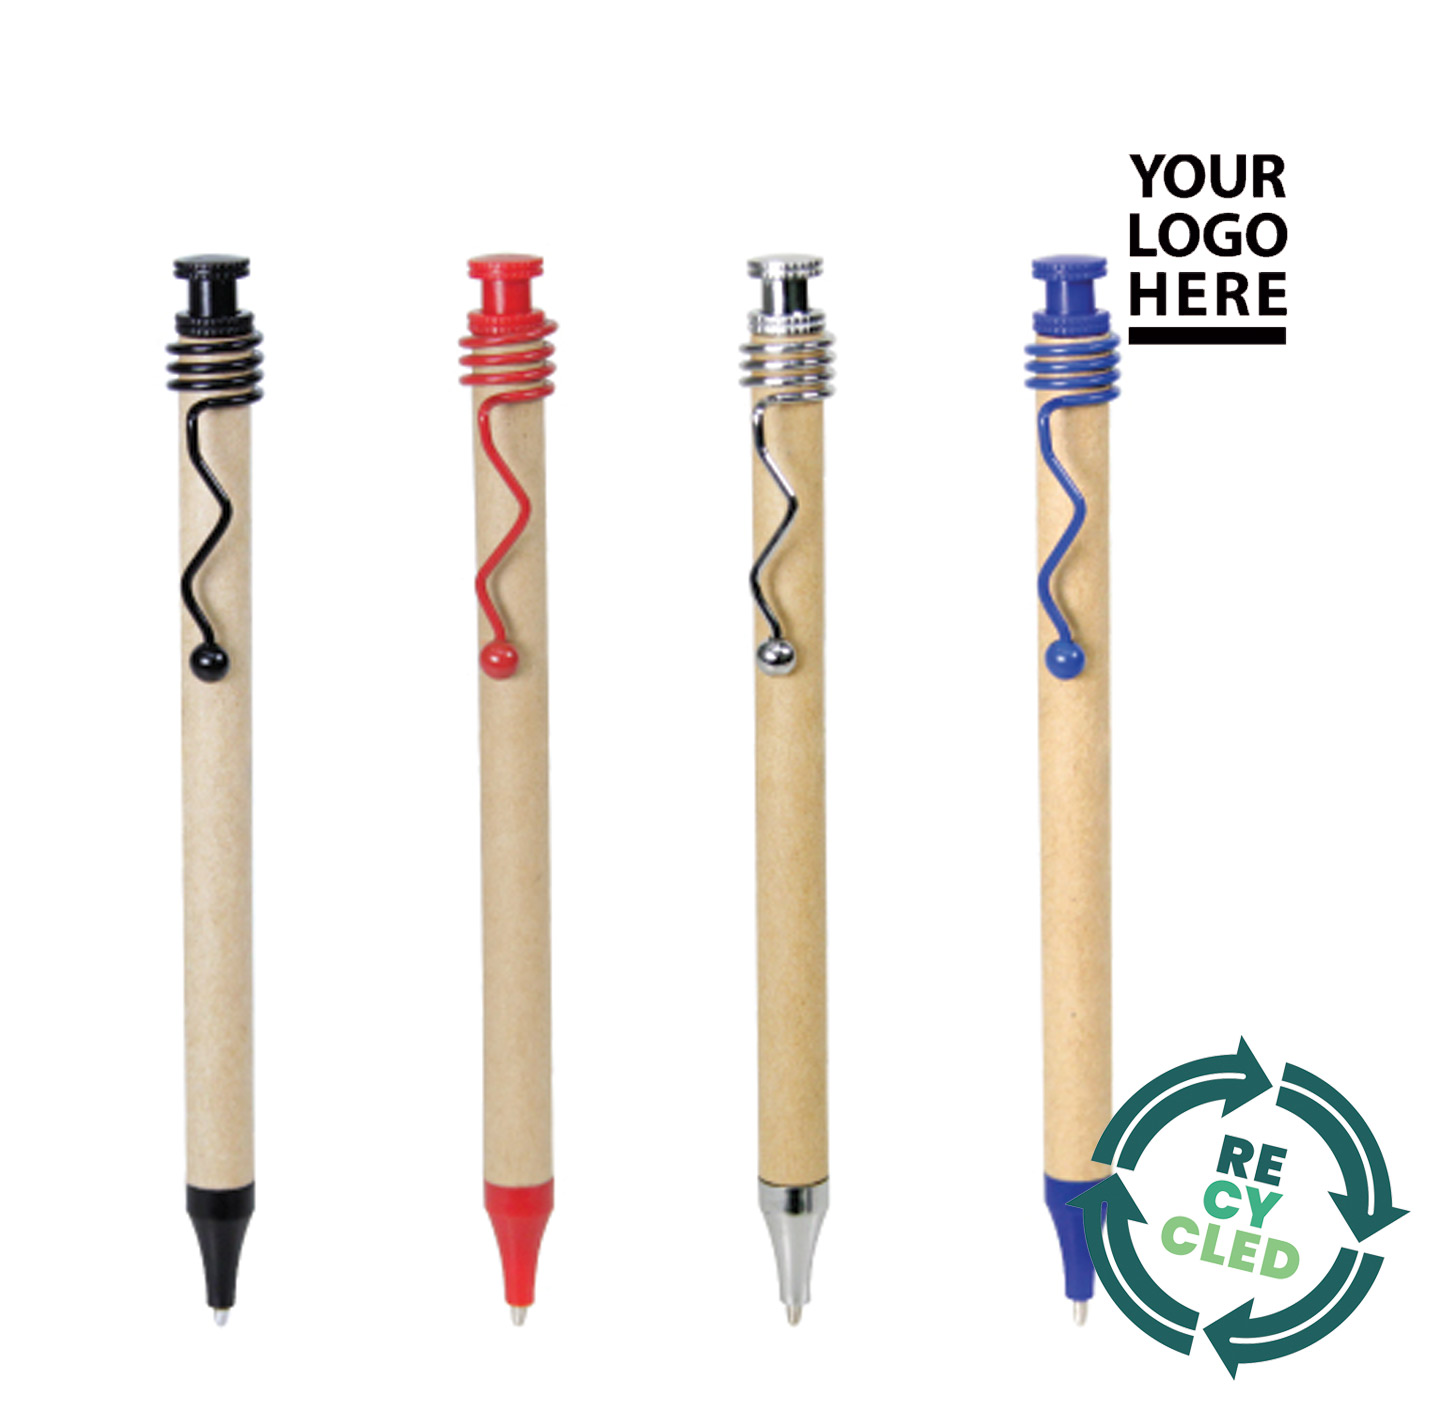 Environmentally friendly eco-friendly pens made from recycled materials